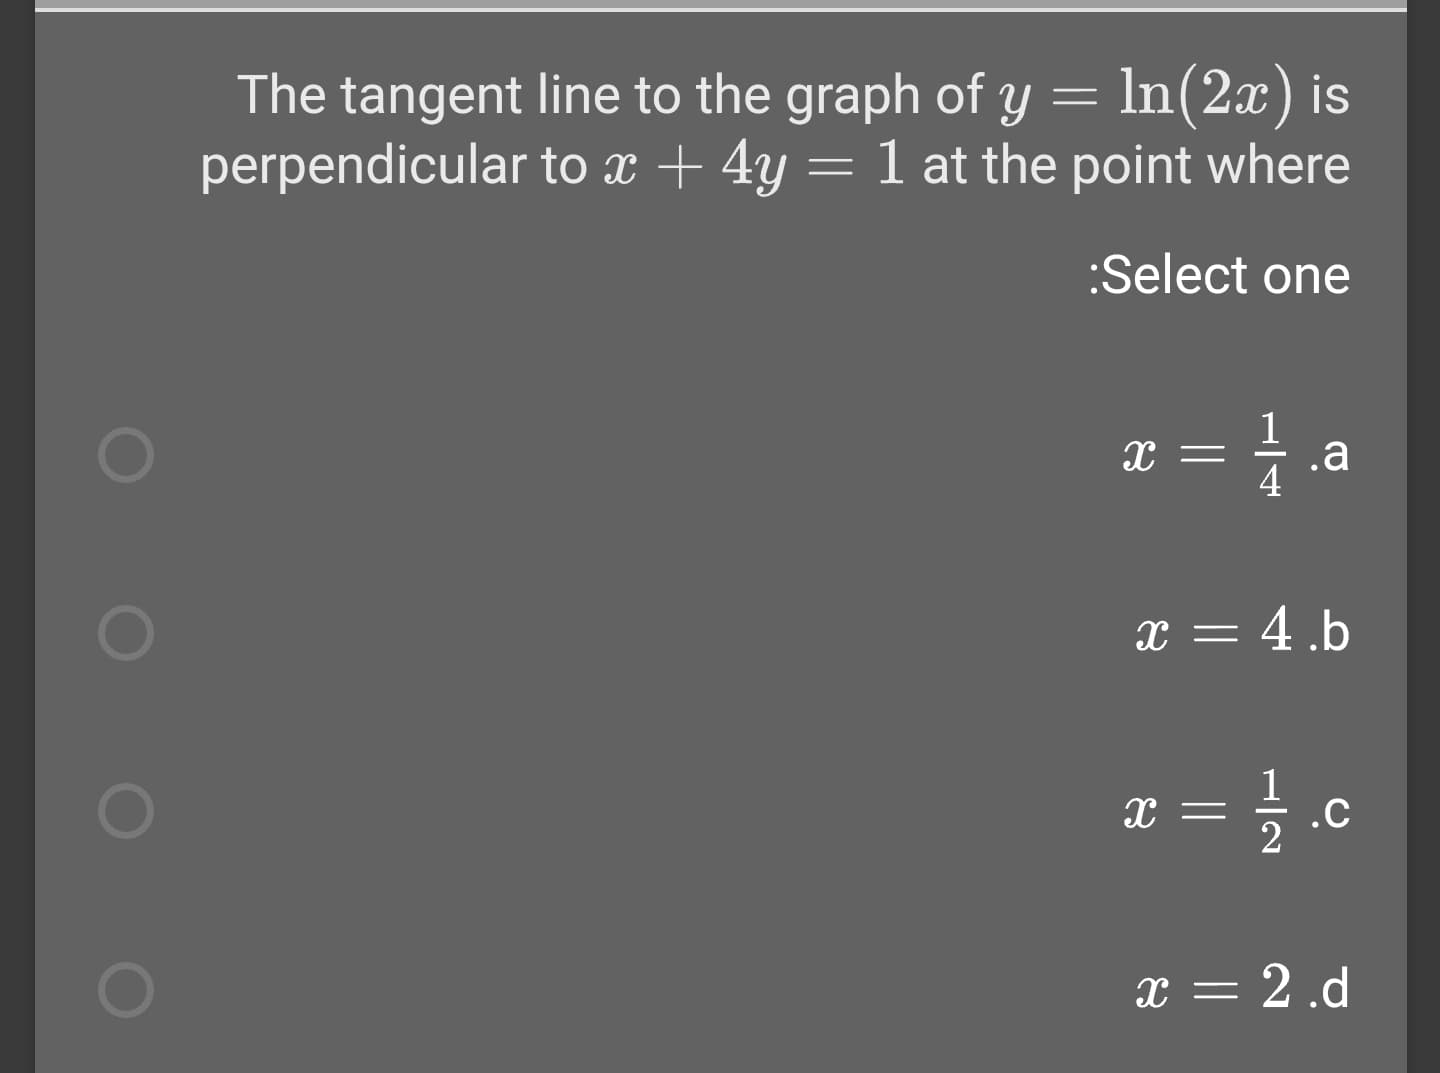 The tangent line to the graph of y = In(2x) is
perpendicular to x + 4y = 1 at the point where
:Select one
.a
x = 4.b
.C
x = 2 .d
H/4
